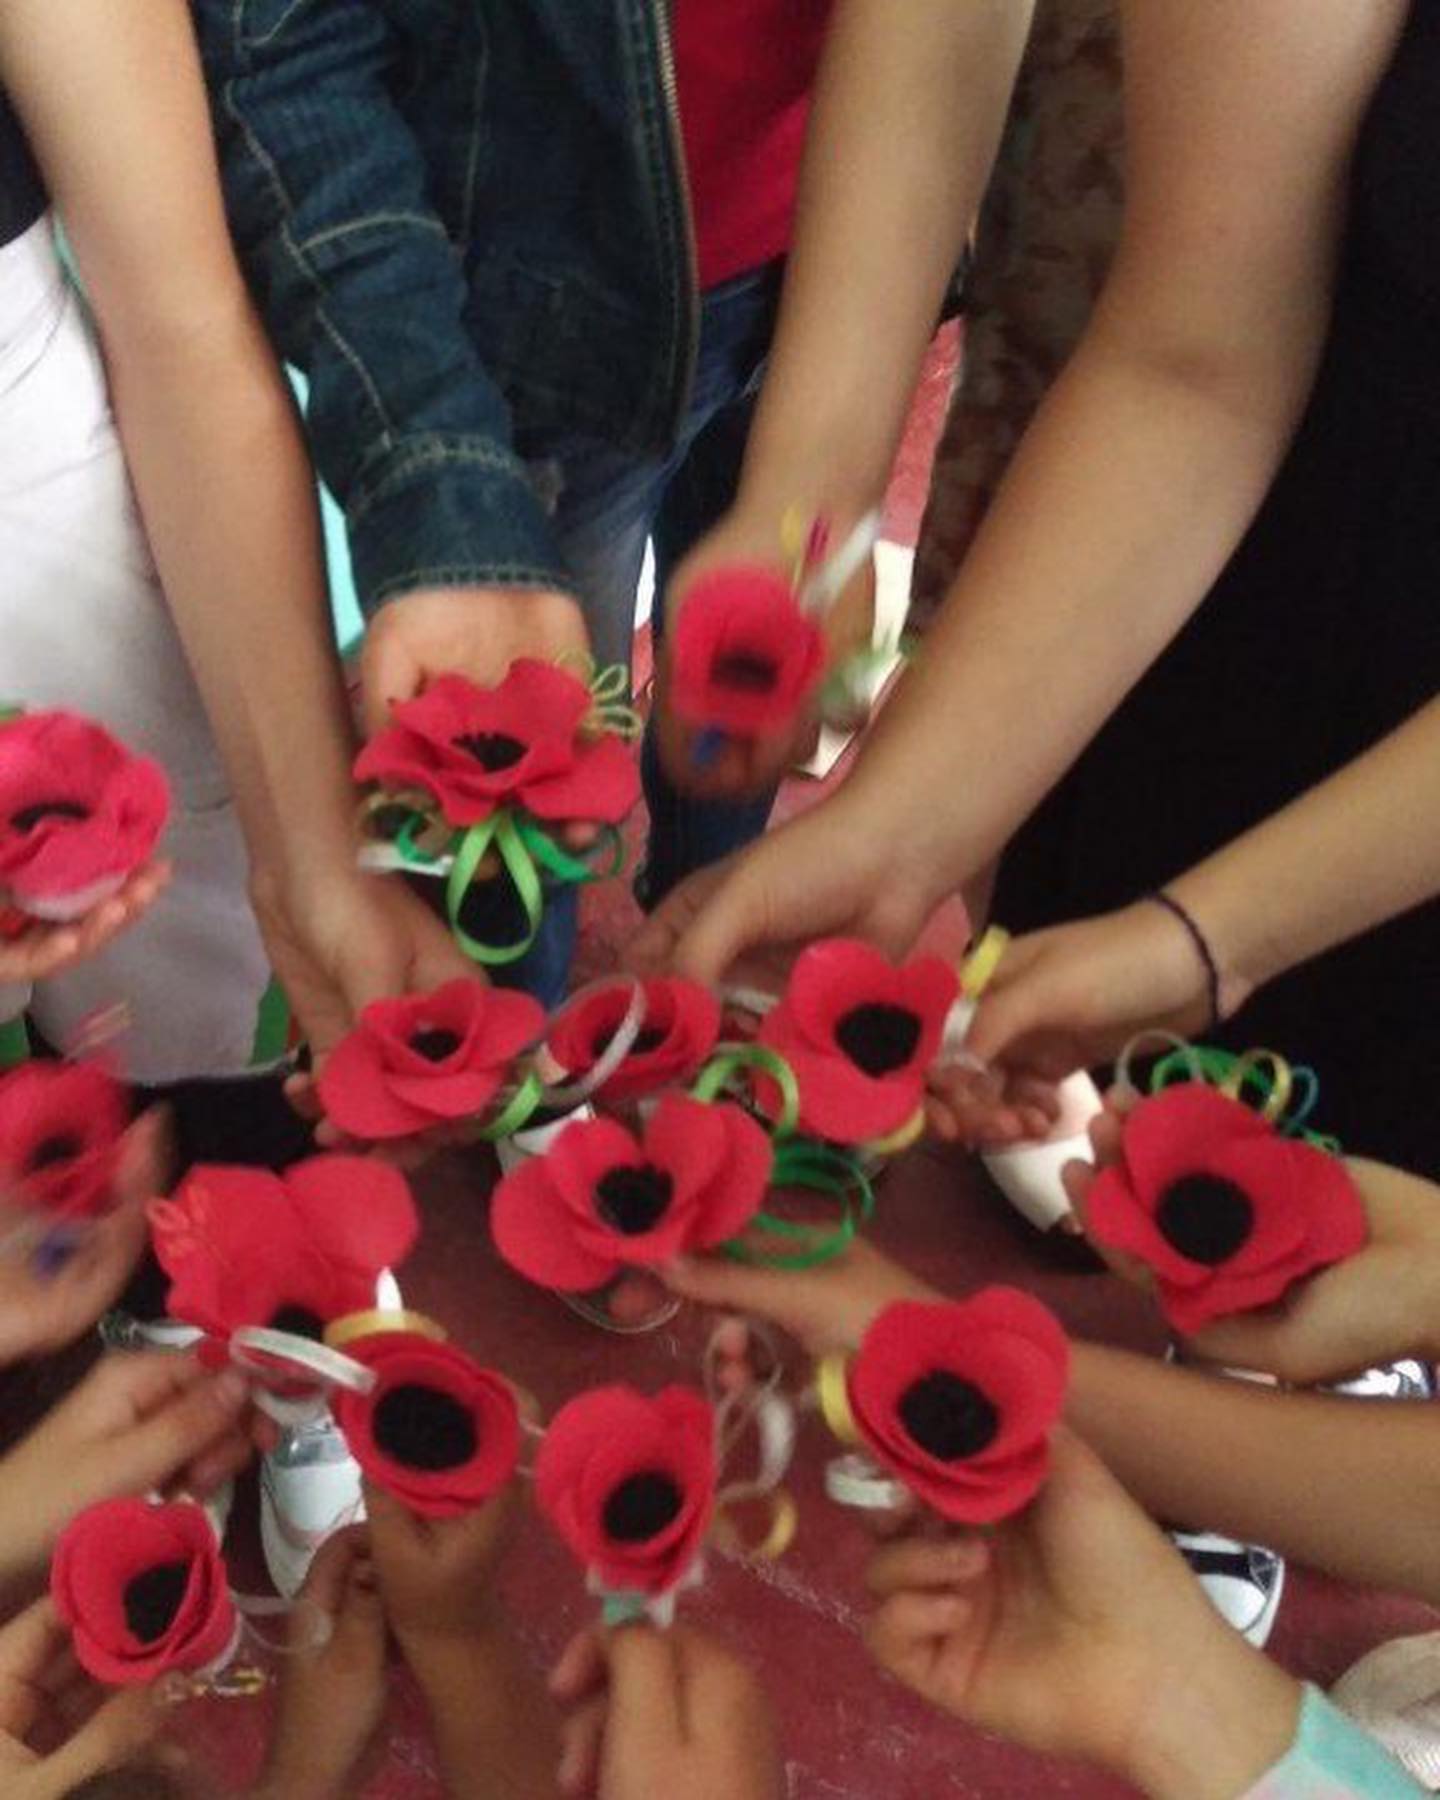 a group of people standing around each other holding red flowers.